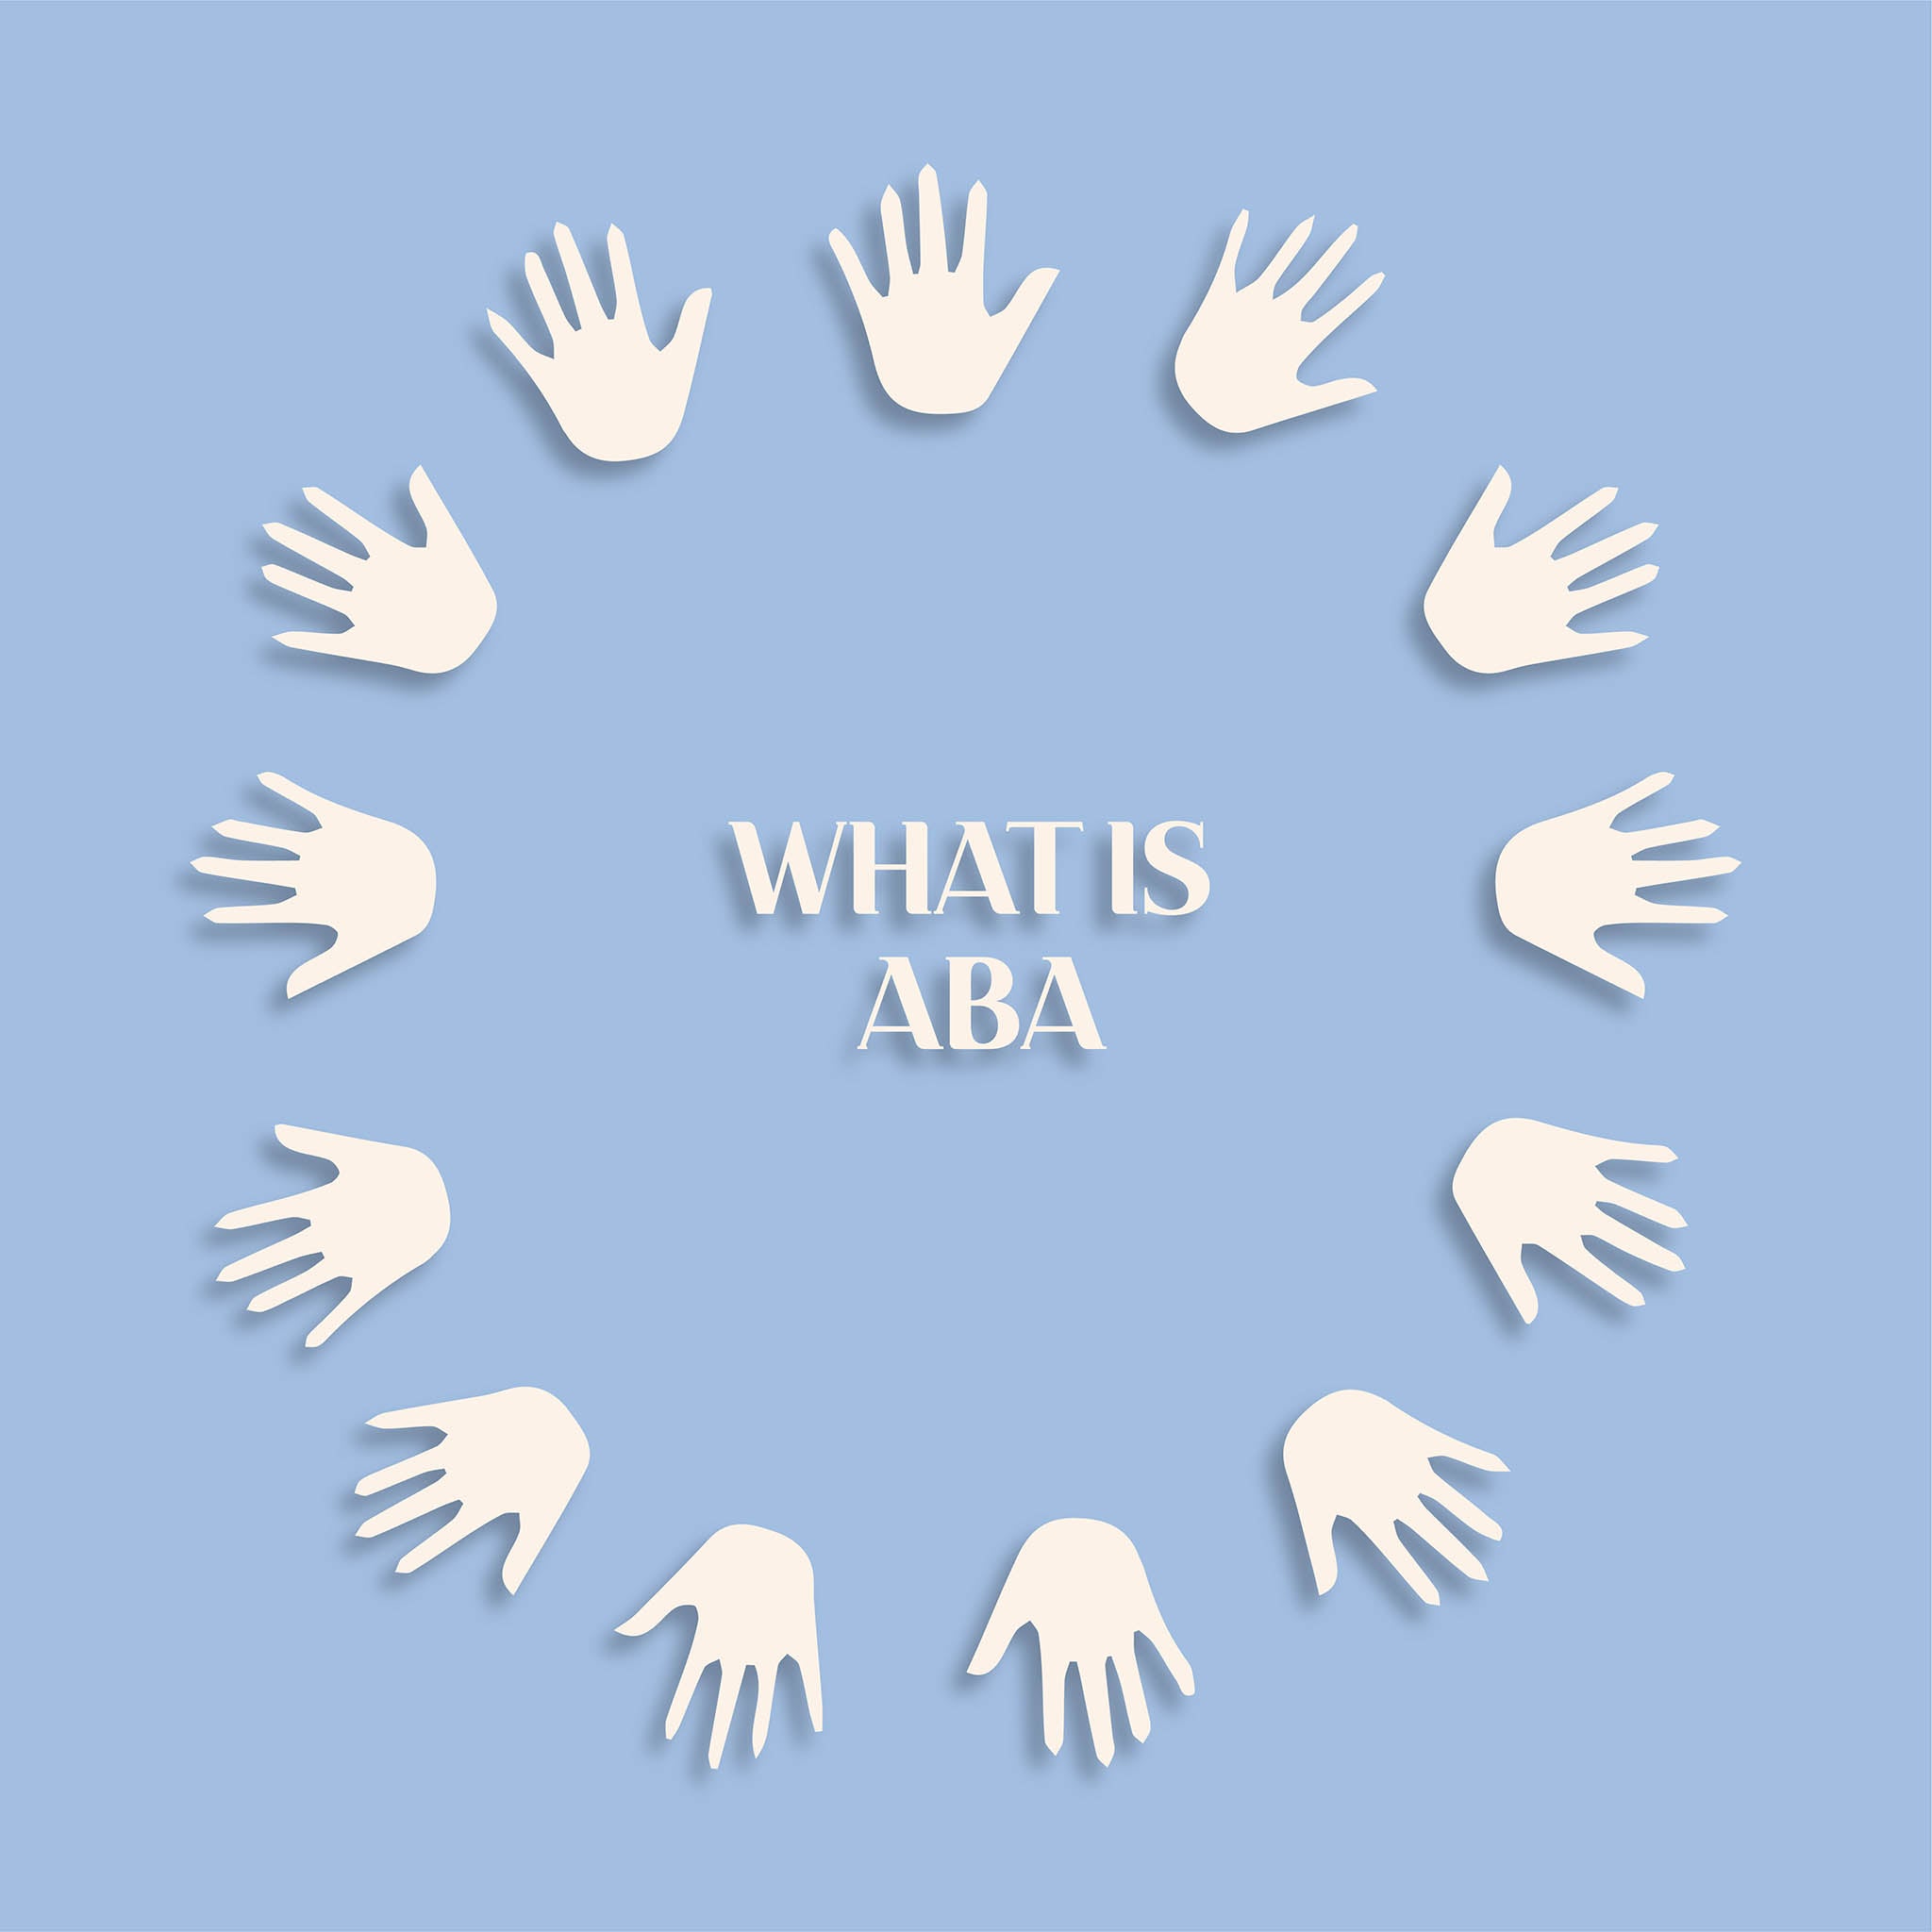 What Is ABA?